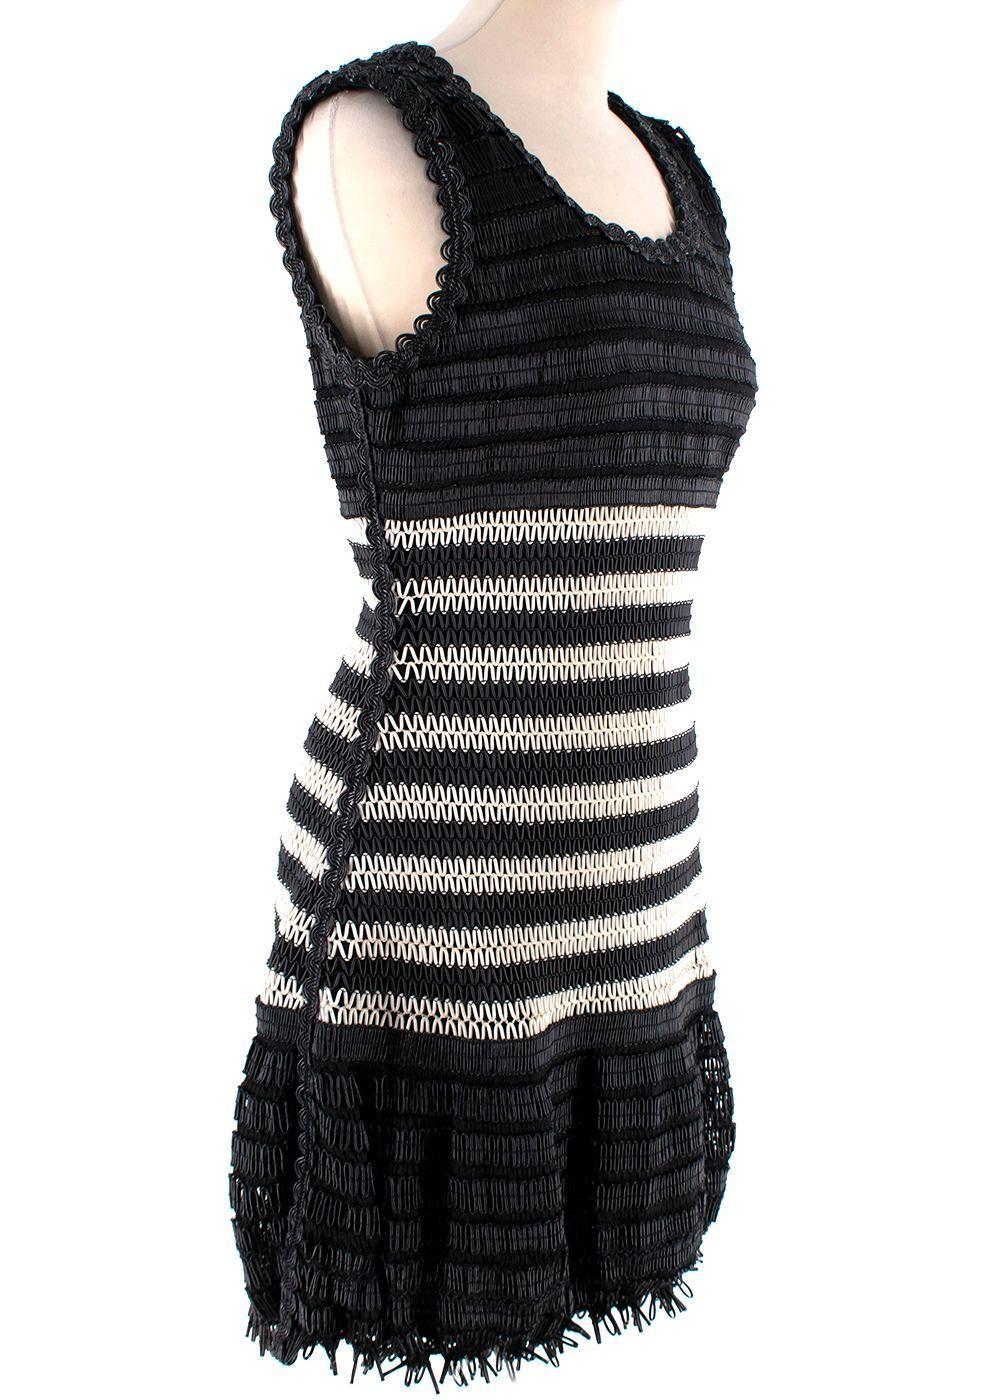 Chanel Vintage Black & White Woven Mini Dress

- Incredible vintage piece from Spring '94
- Woven from black and white vinyl tubing in a chevron-like pattern
- Drop waist, with a textured, 3-D hemline 
- Scoop neck, sleeveless 
- Fully lined